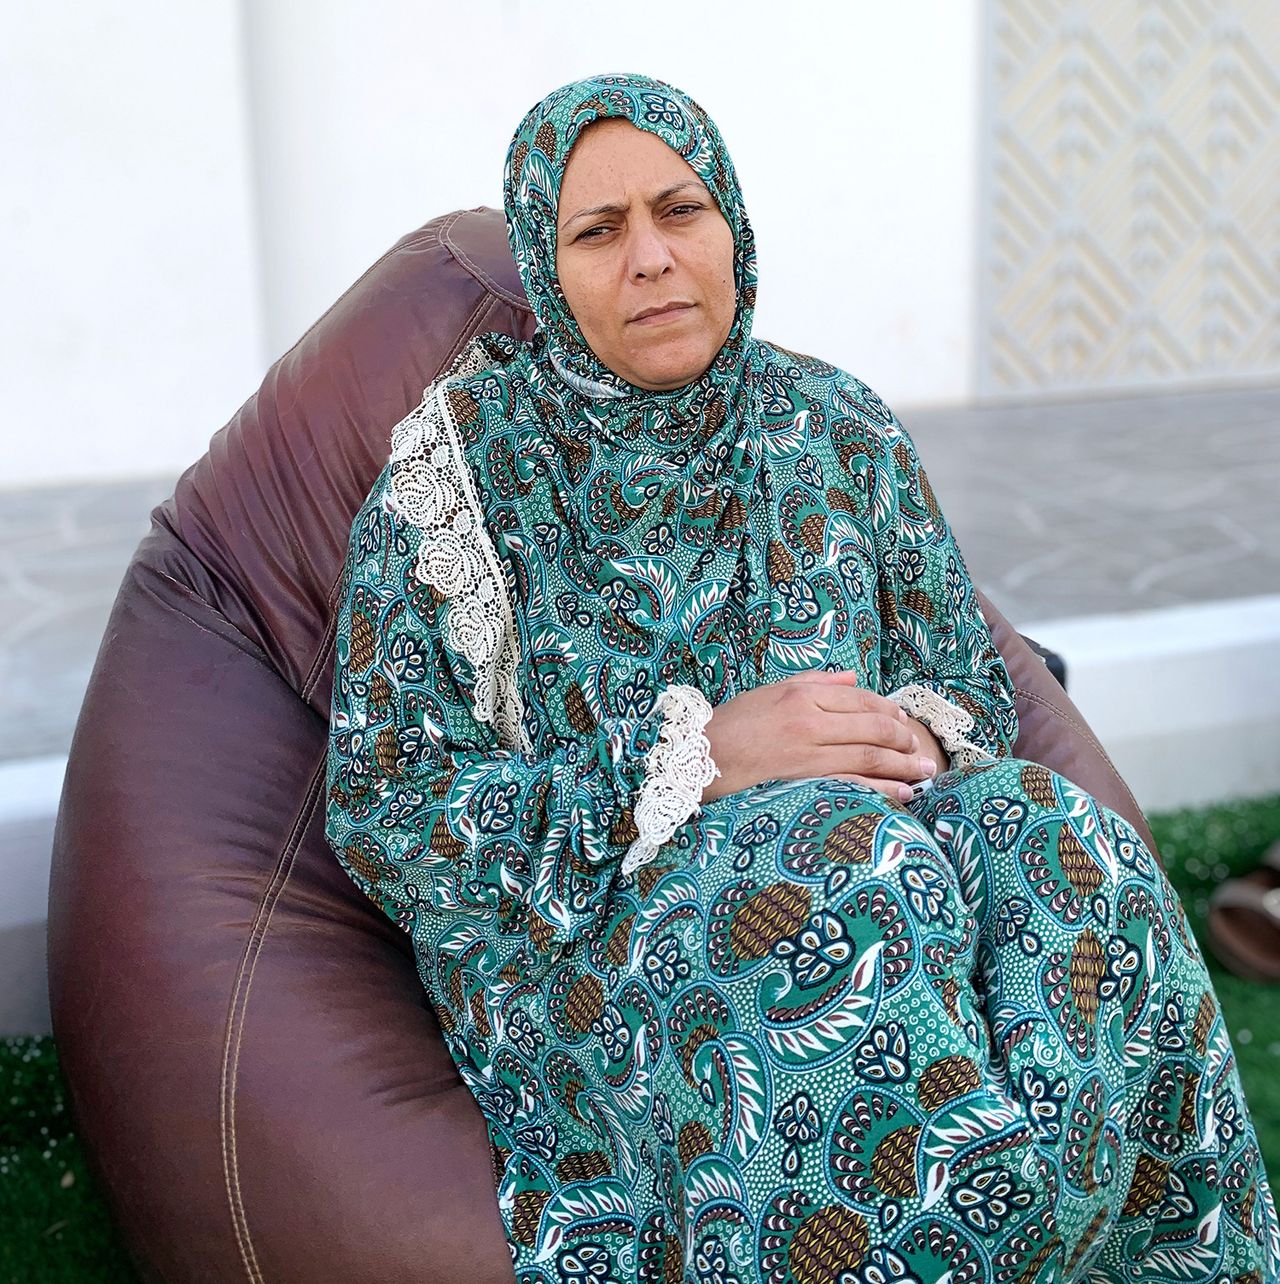 Samira Thari was evacuated from Gaza to Qatar after she was injured and her young granddaughter was killed by an Israeli strike.